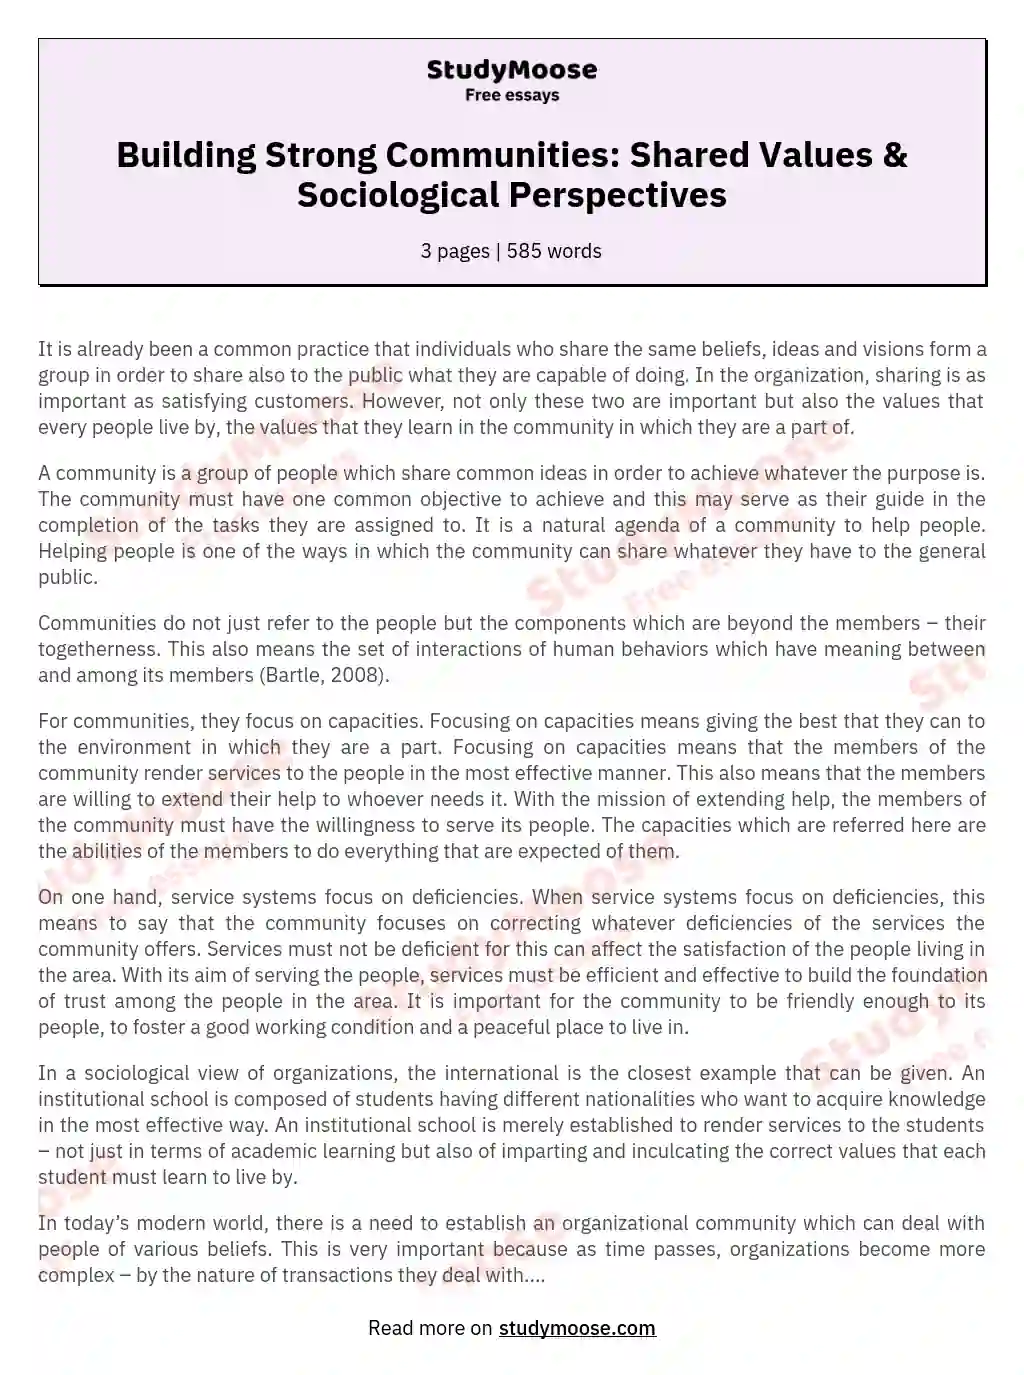 Building Strong Communities: Shared Values & Sociological Perspectives essay